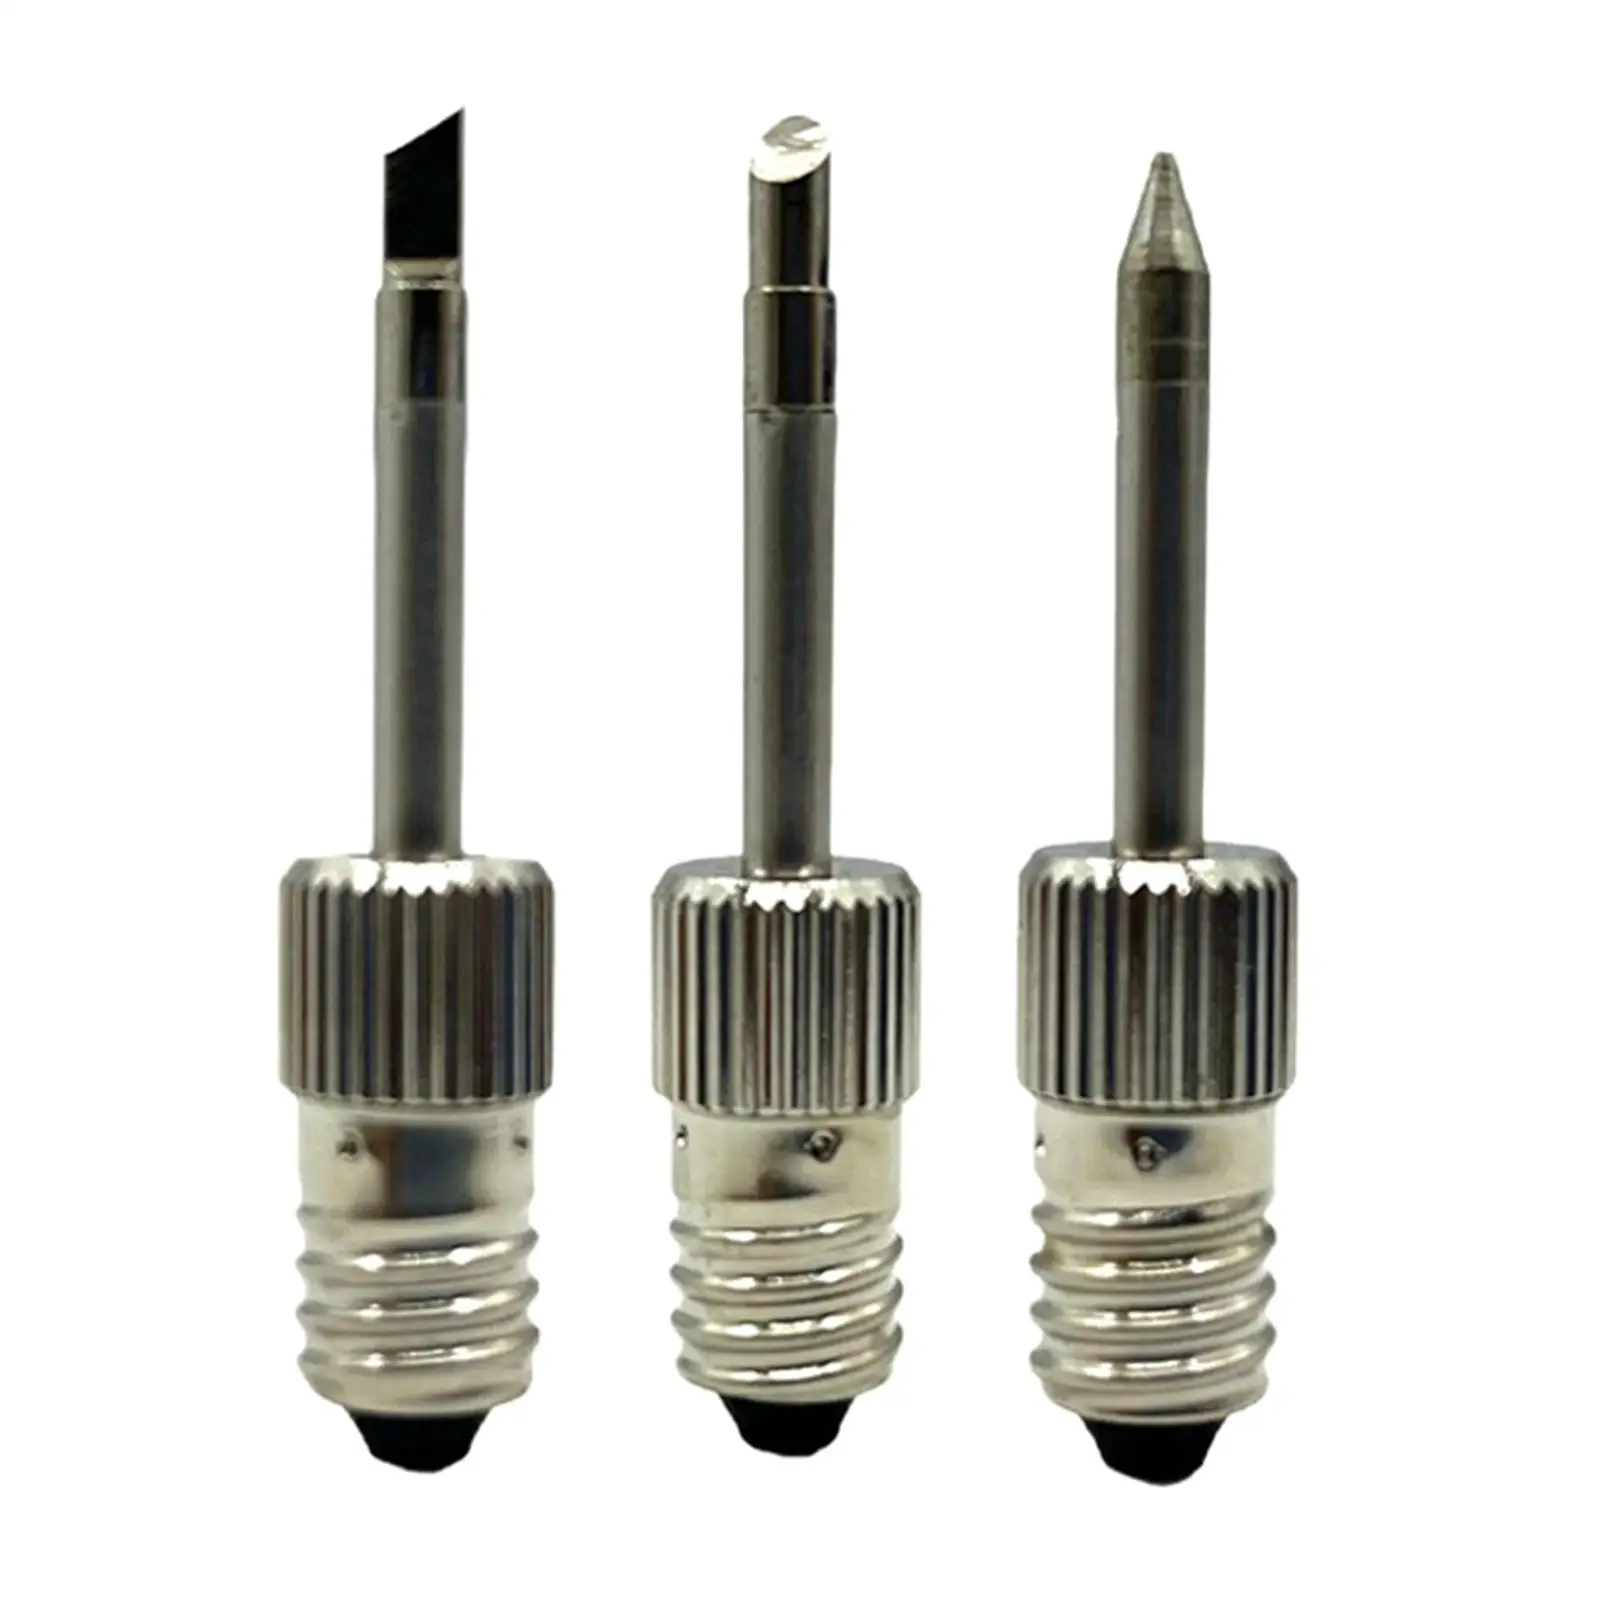 Replacement Soldering Iron Tips E10 Interface Battery Electronic Threaded Soldering Needle Tips for Outdoor Indoor Accessories